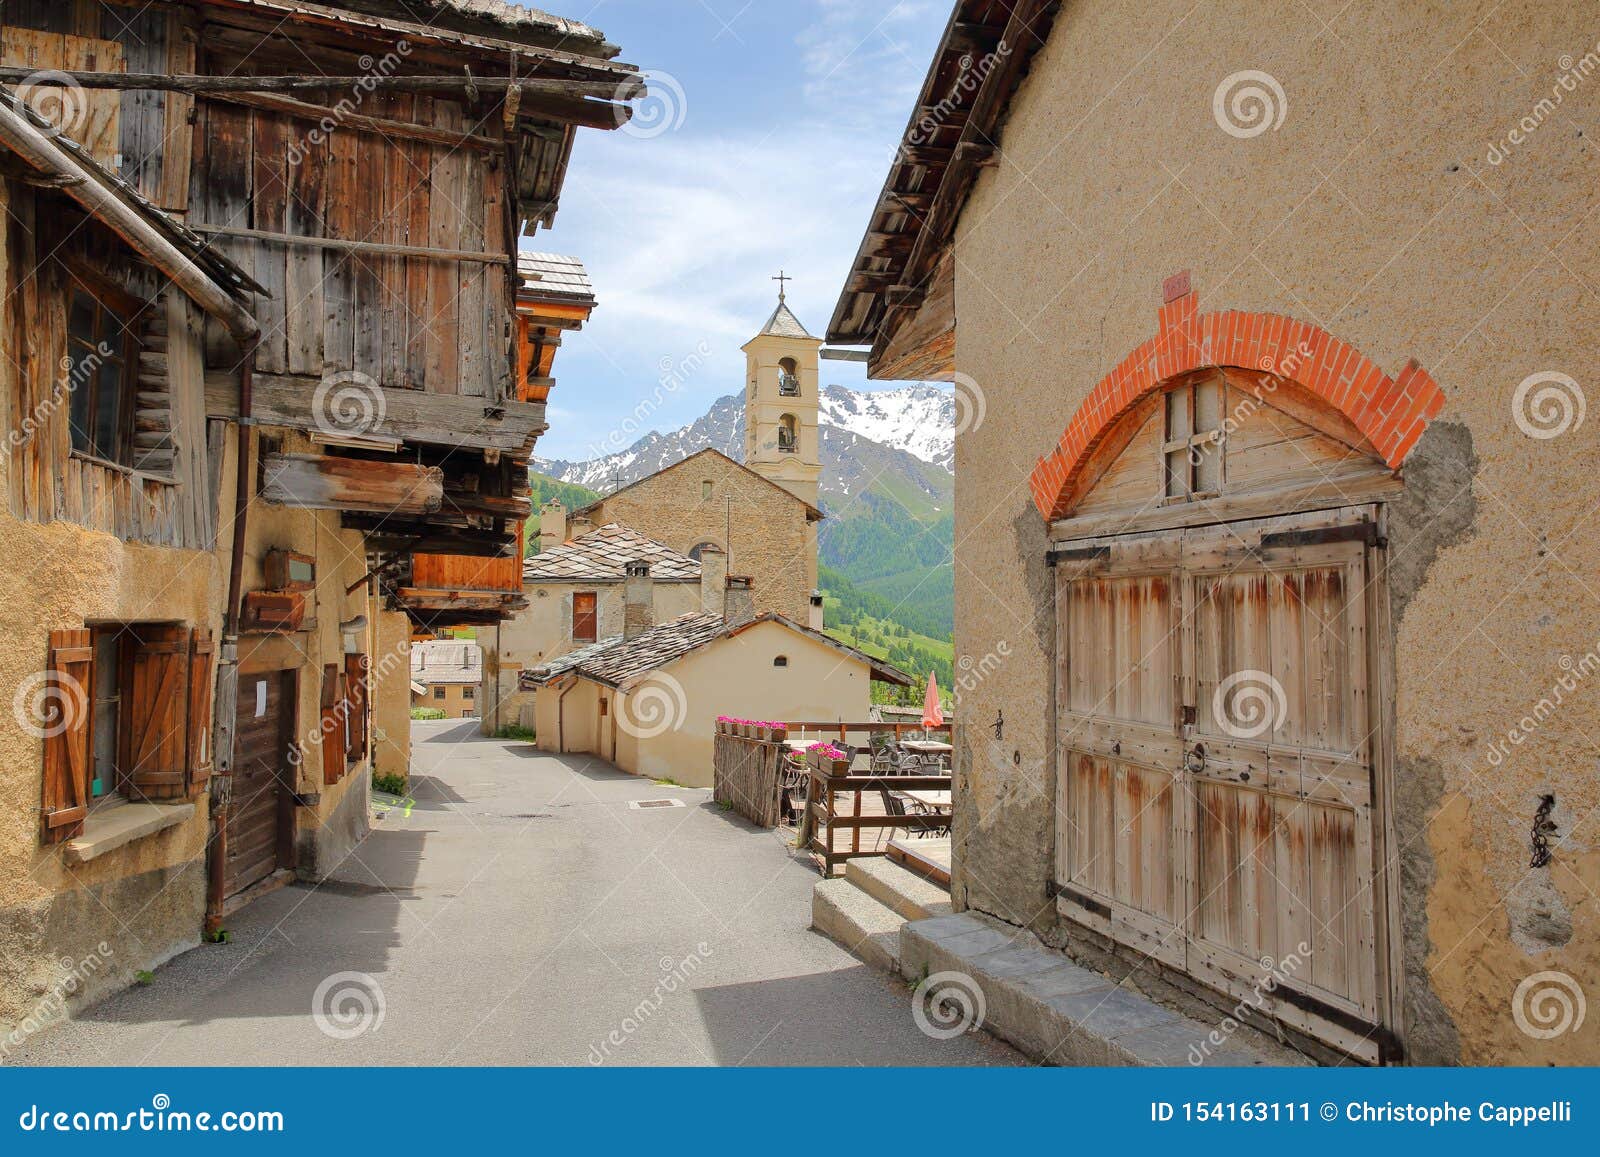 traditional wooden houses and the church in saint veran village, with mountain range covered with snow in the background